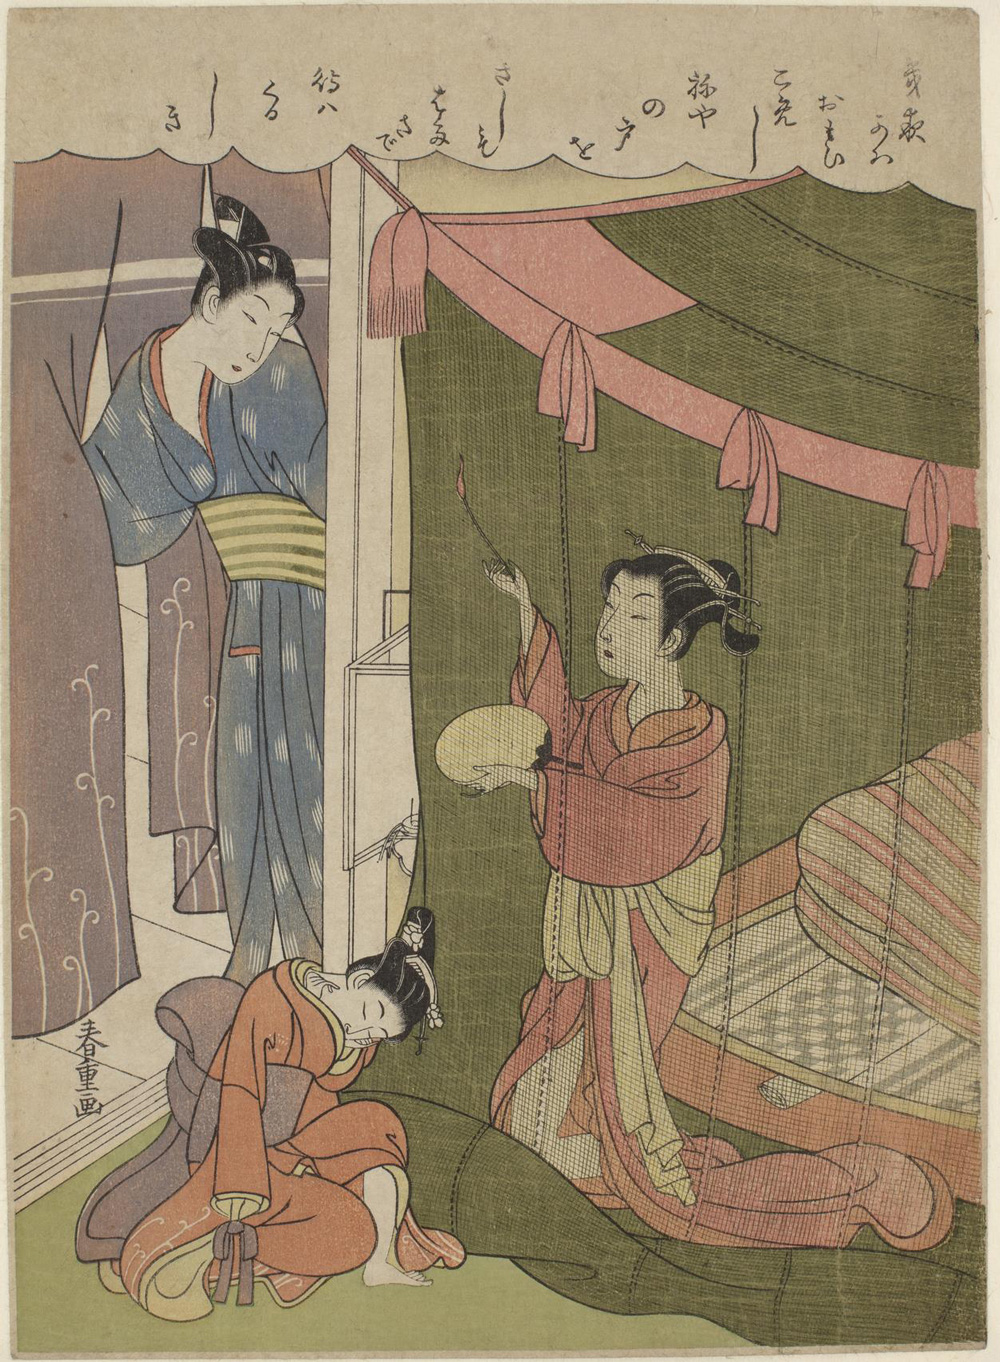 Japanese print of a group of three women dressed in traditional robes. One women is kneeling inside a netted area, holding a fan and looking out. Outside a smaller figure is kneeling with her eyes closed, behind her a third person stands and holds the curtains of the room